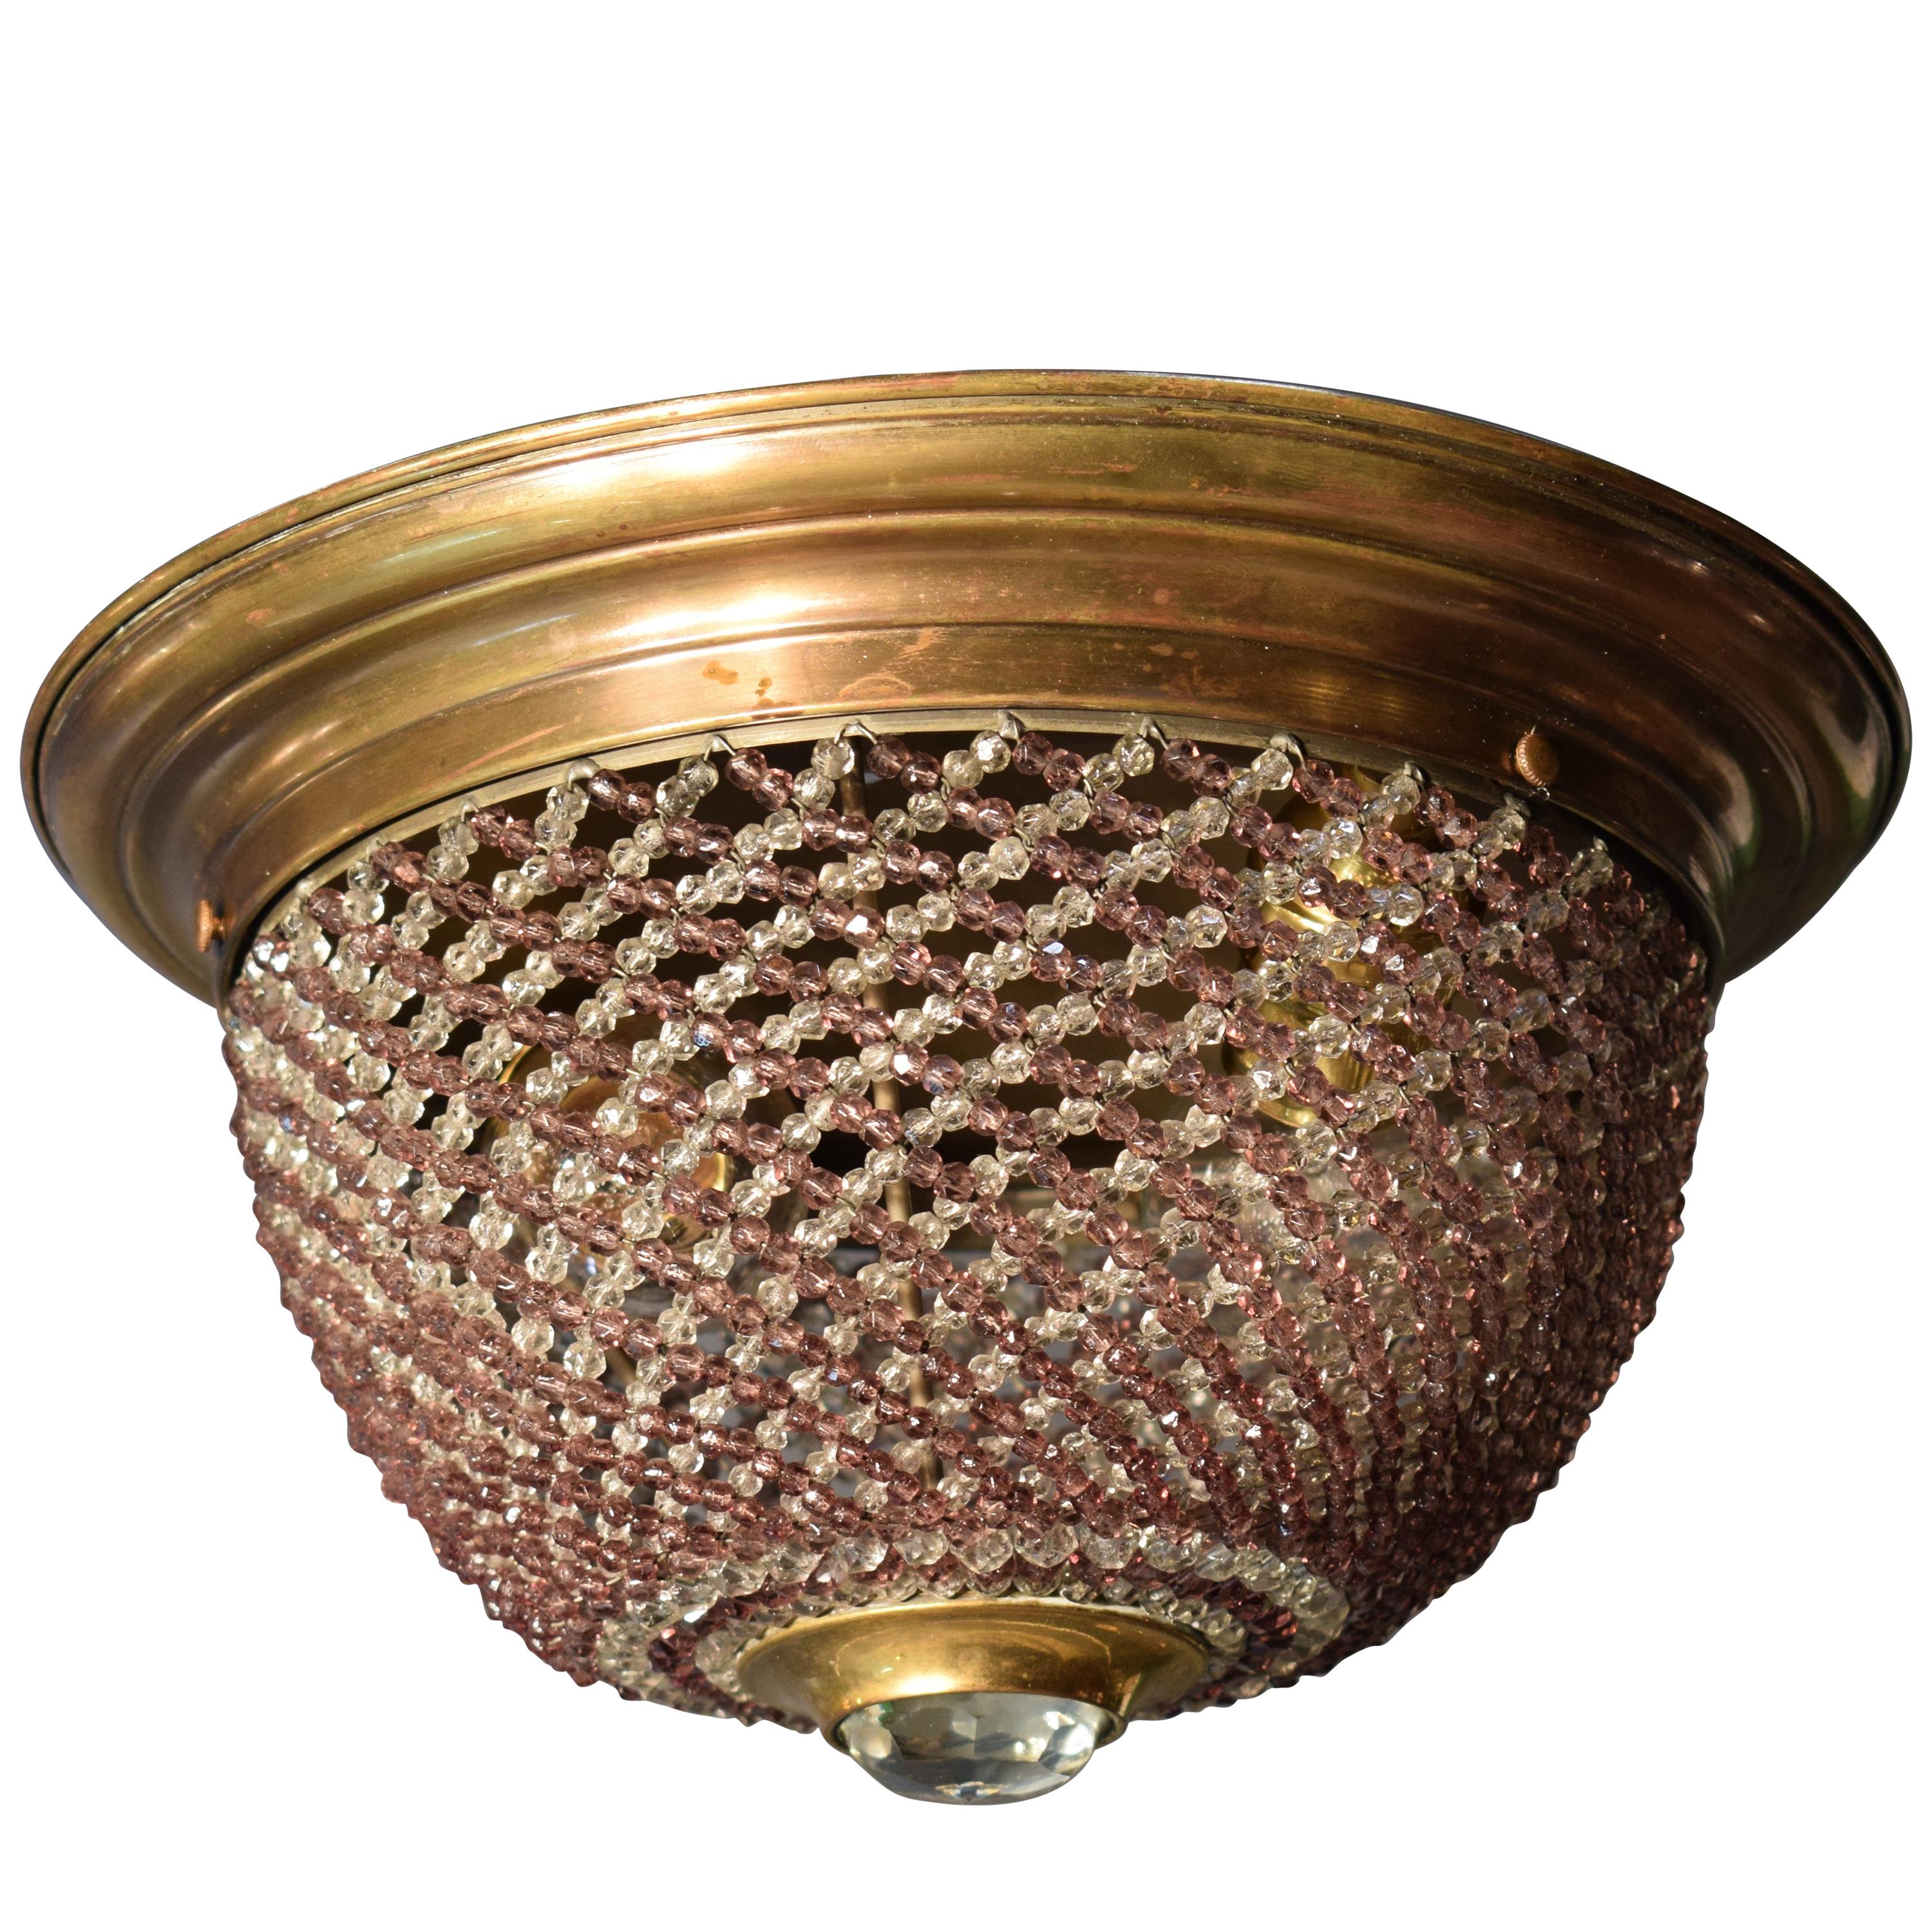 Gilt bronze pendant with two tone beaded woven dome